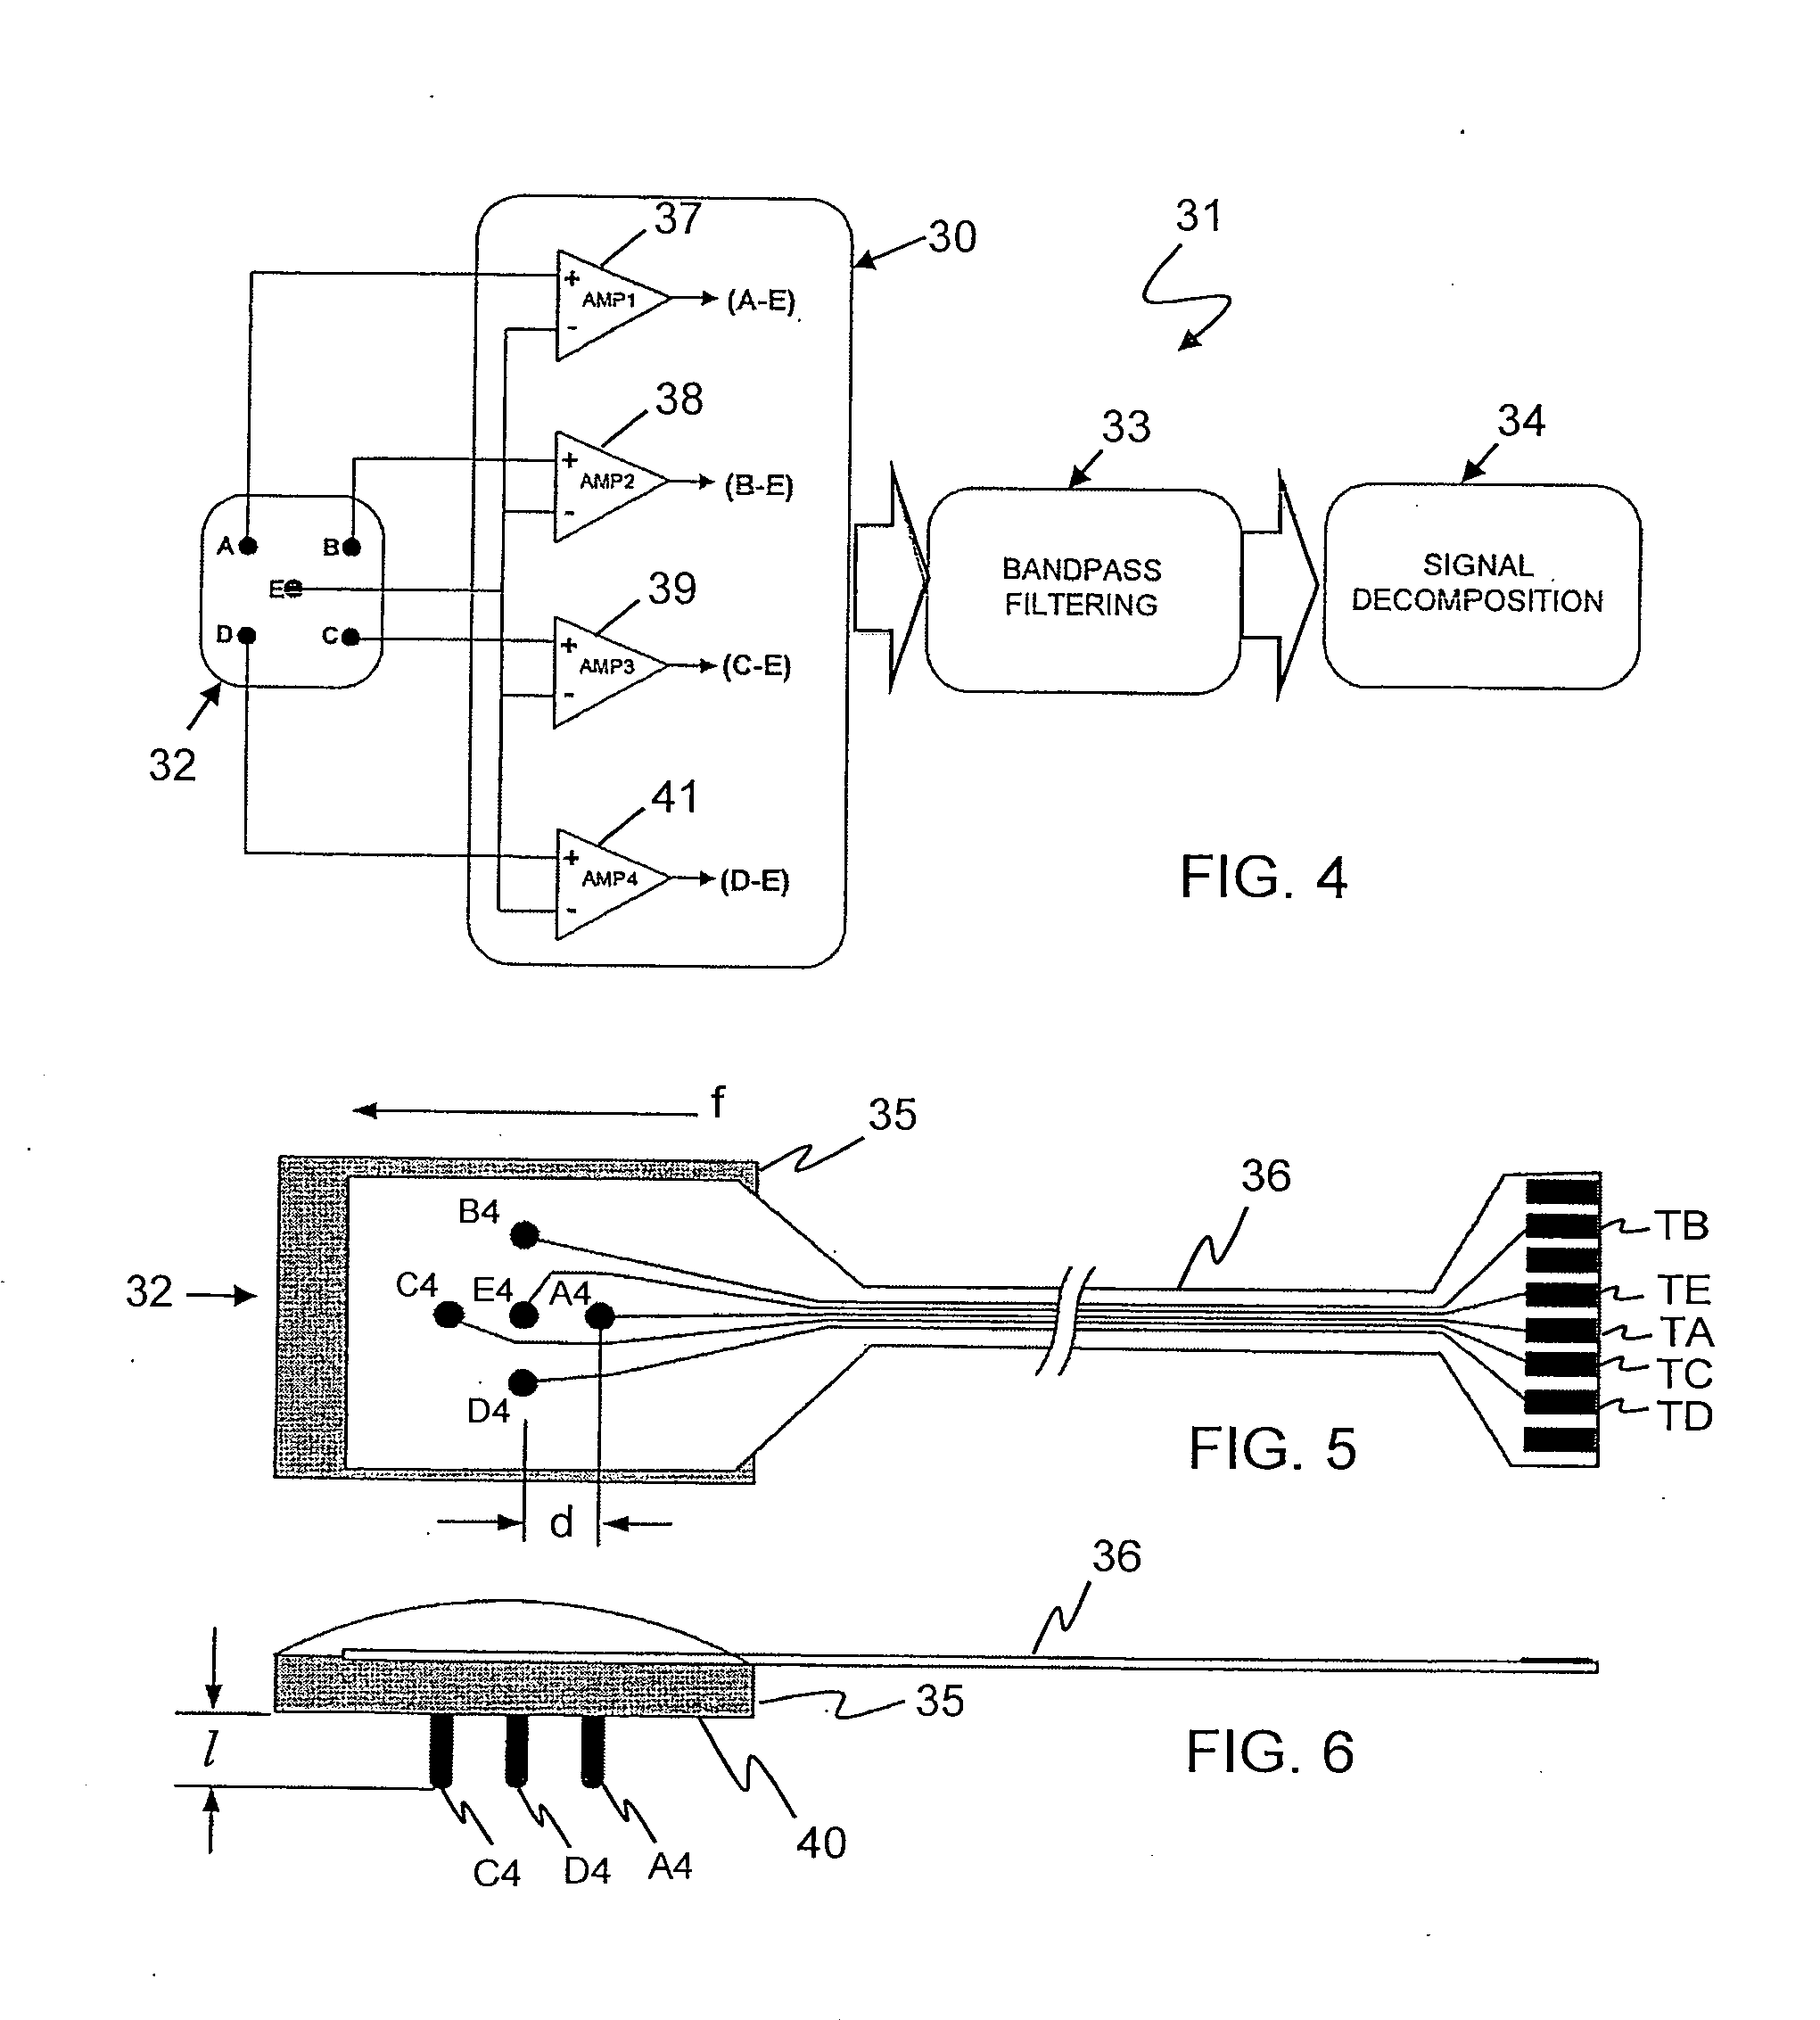 Sensor system for detecting and processing EMG signals